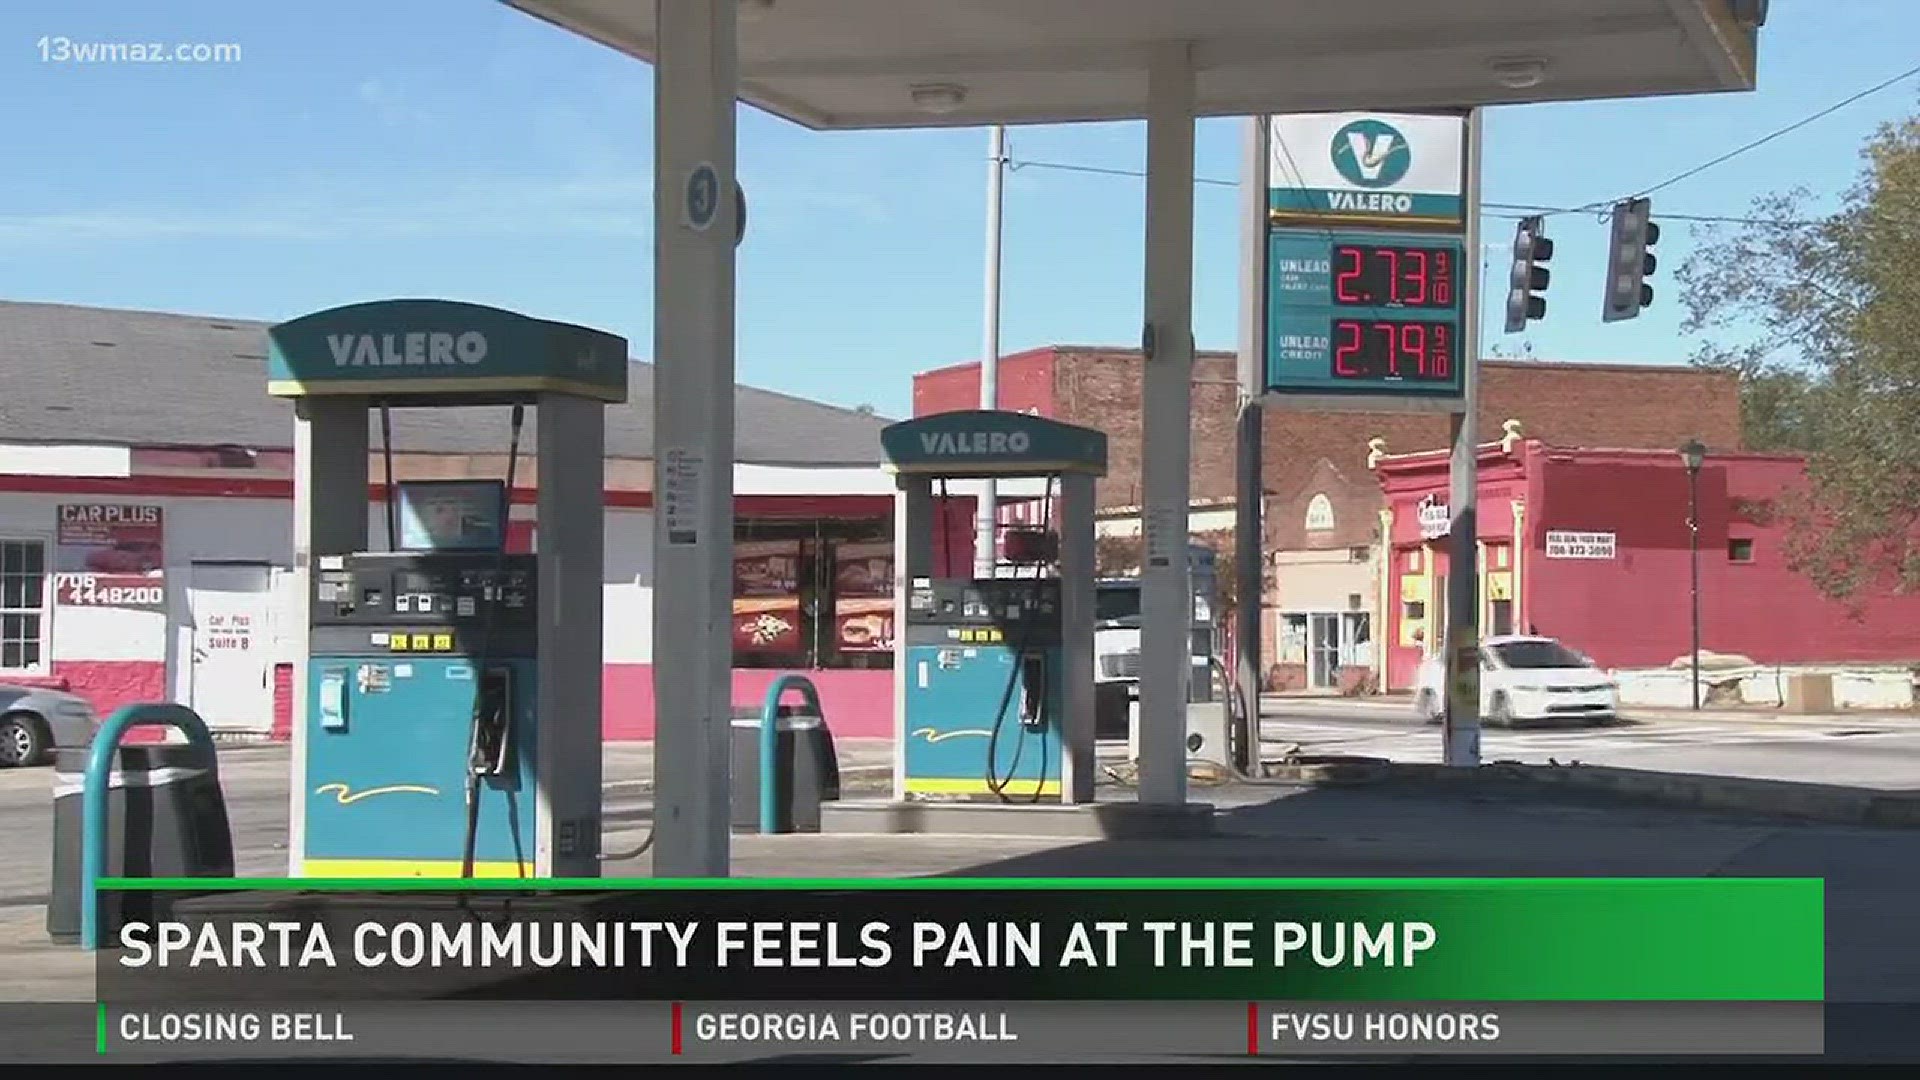 Sparta community feels pain at the pump